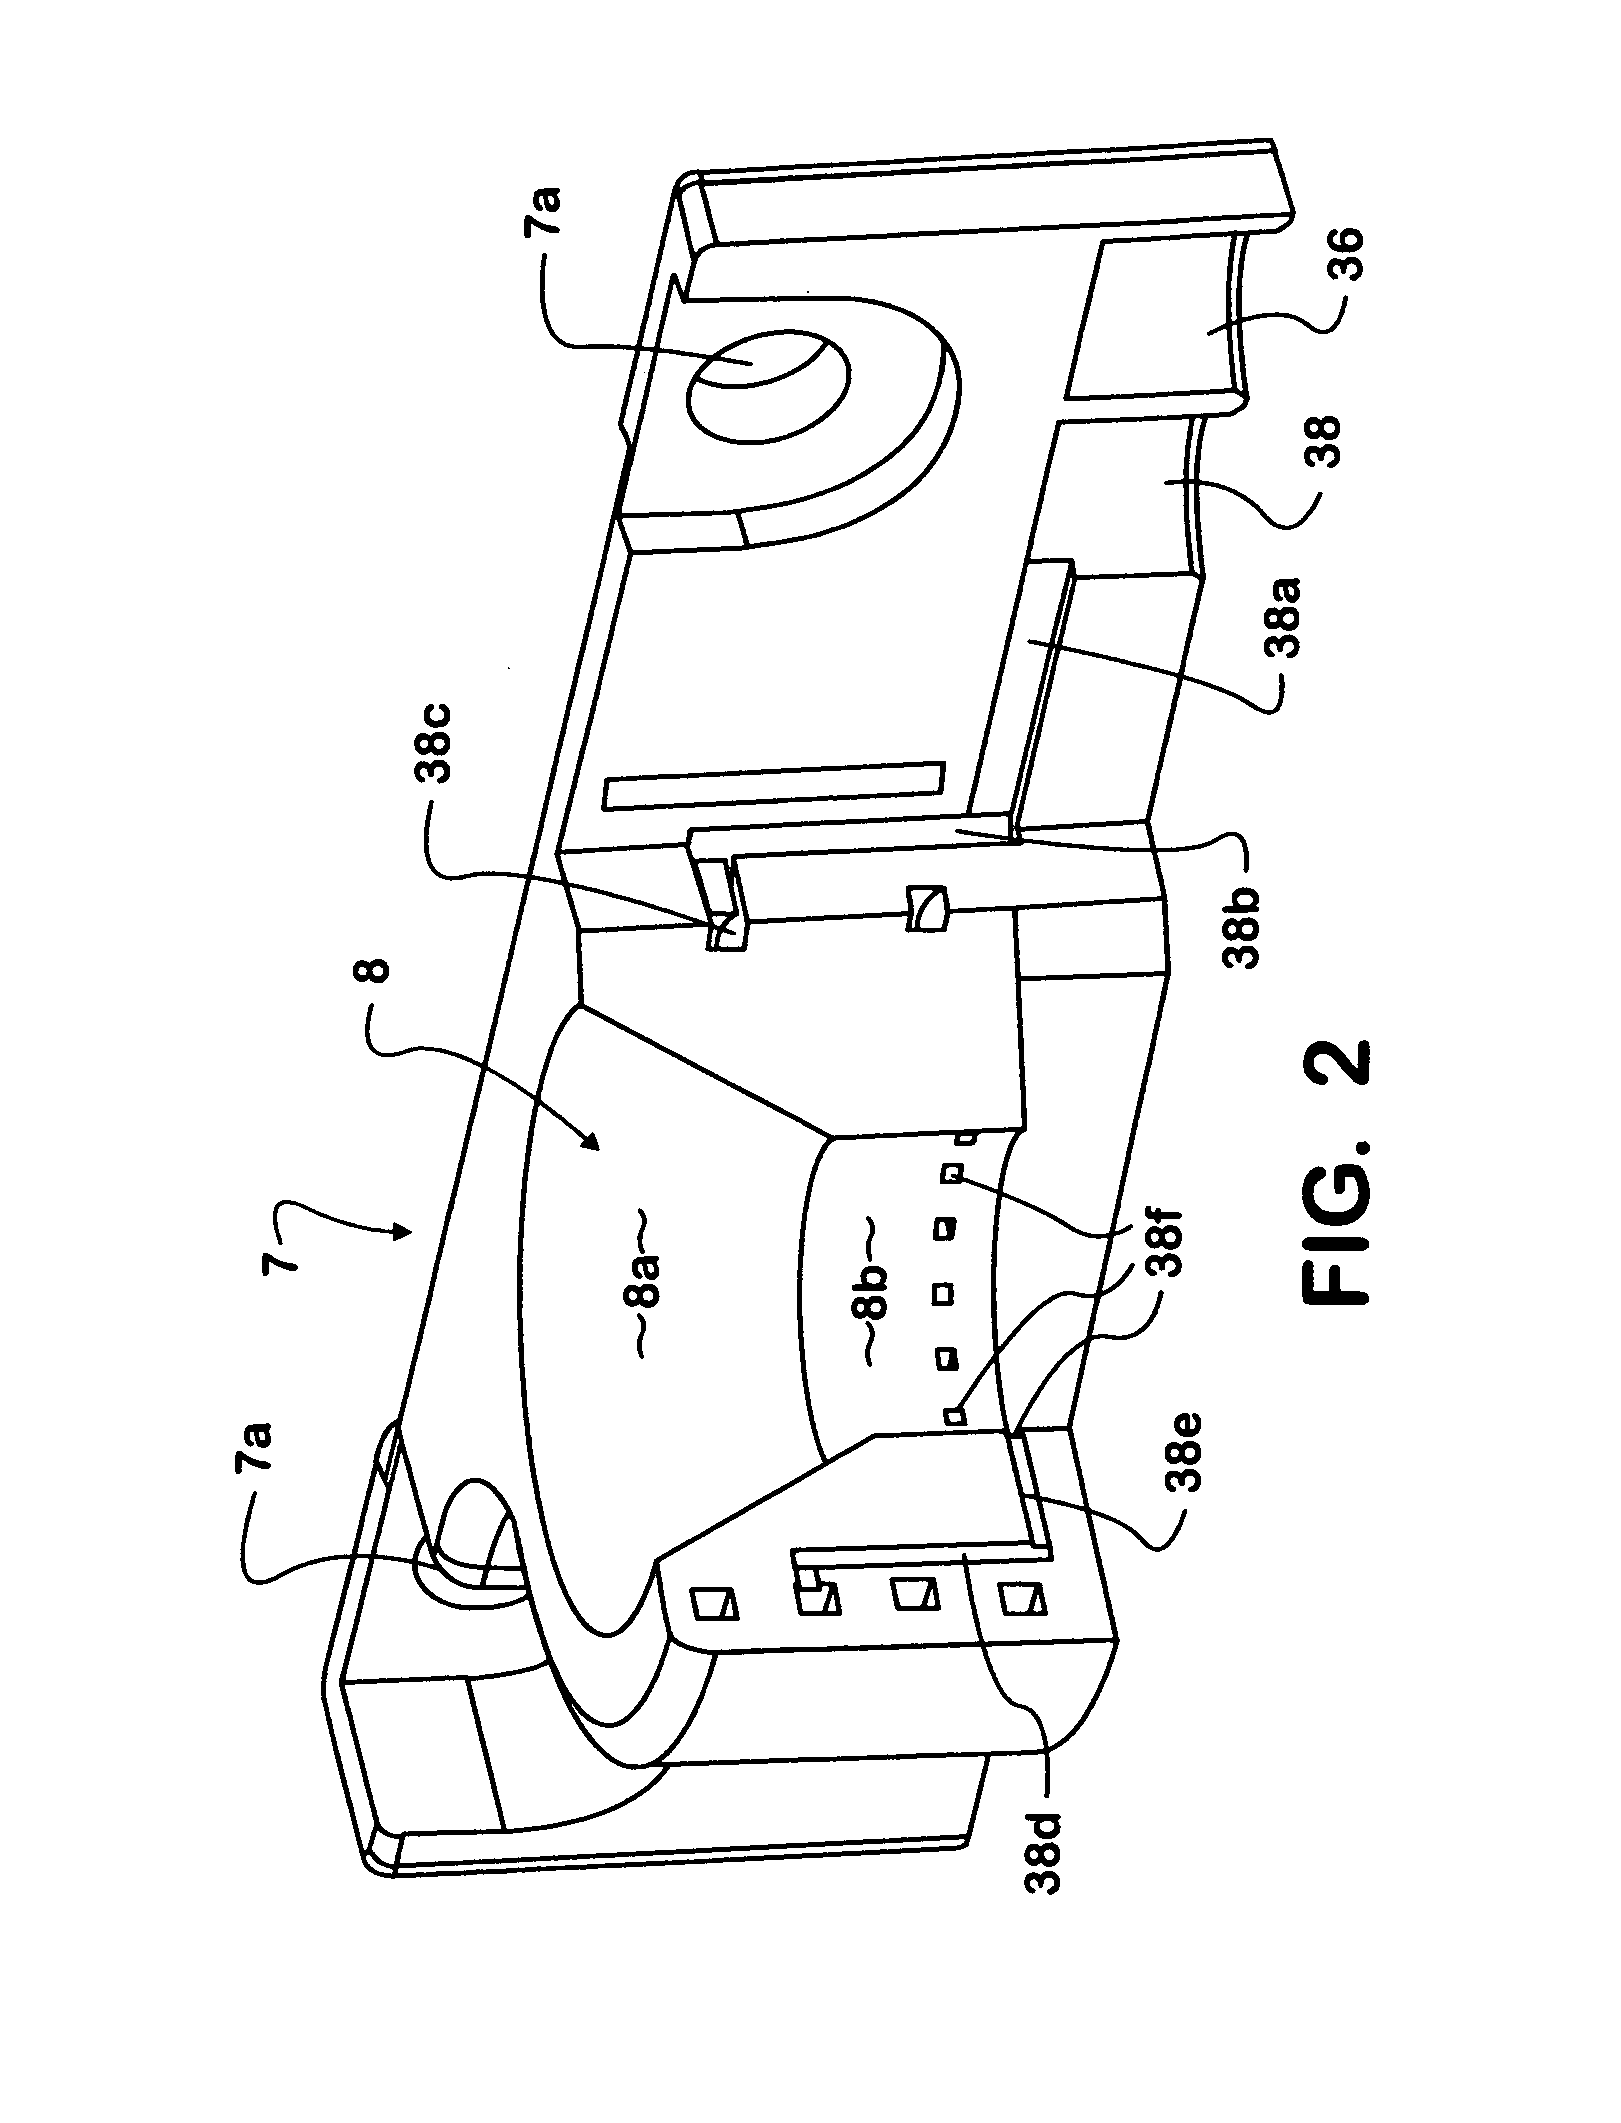 Device for injecting additive fluids into a primary fluid flow